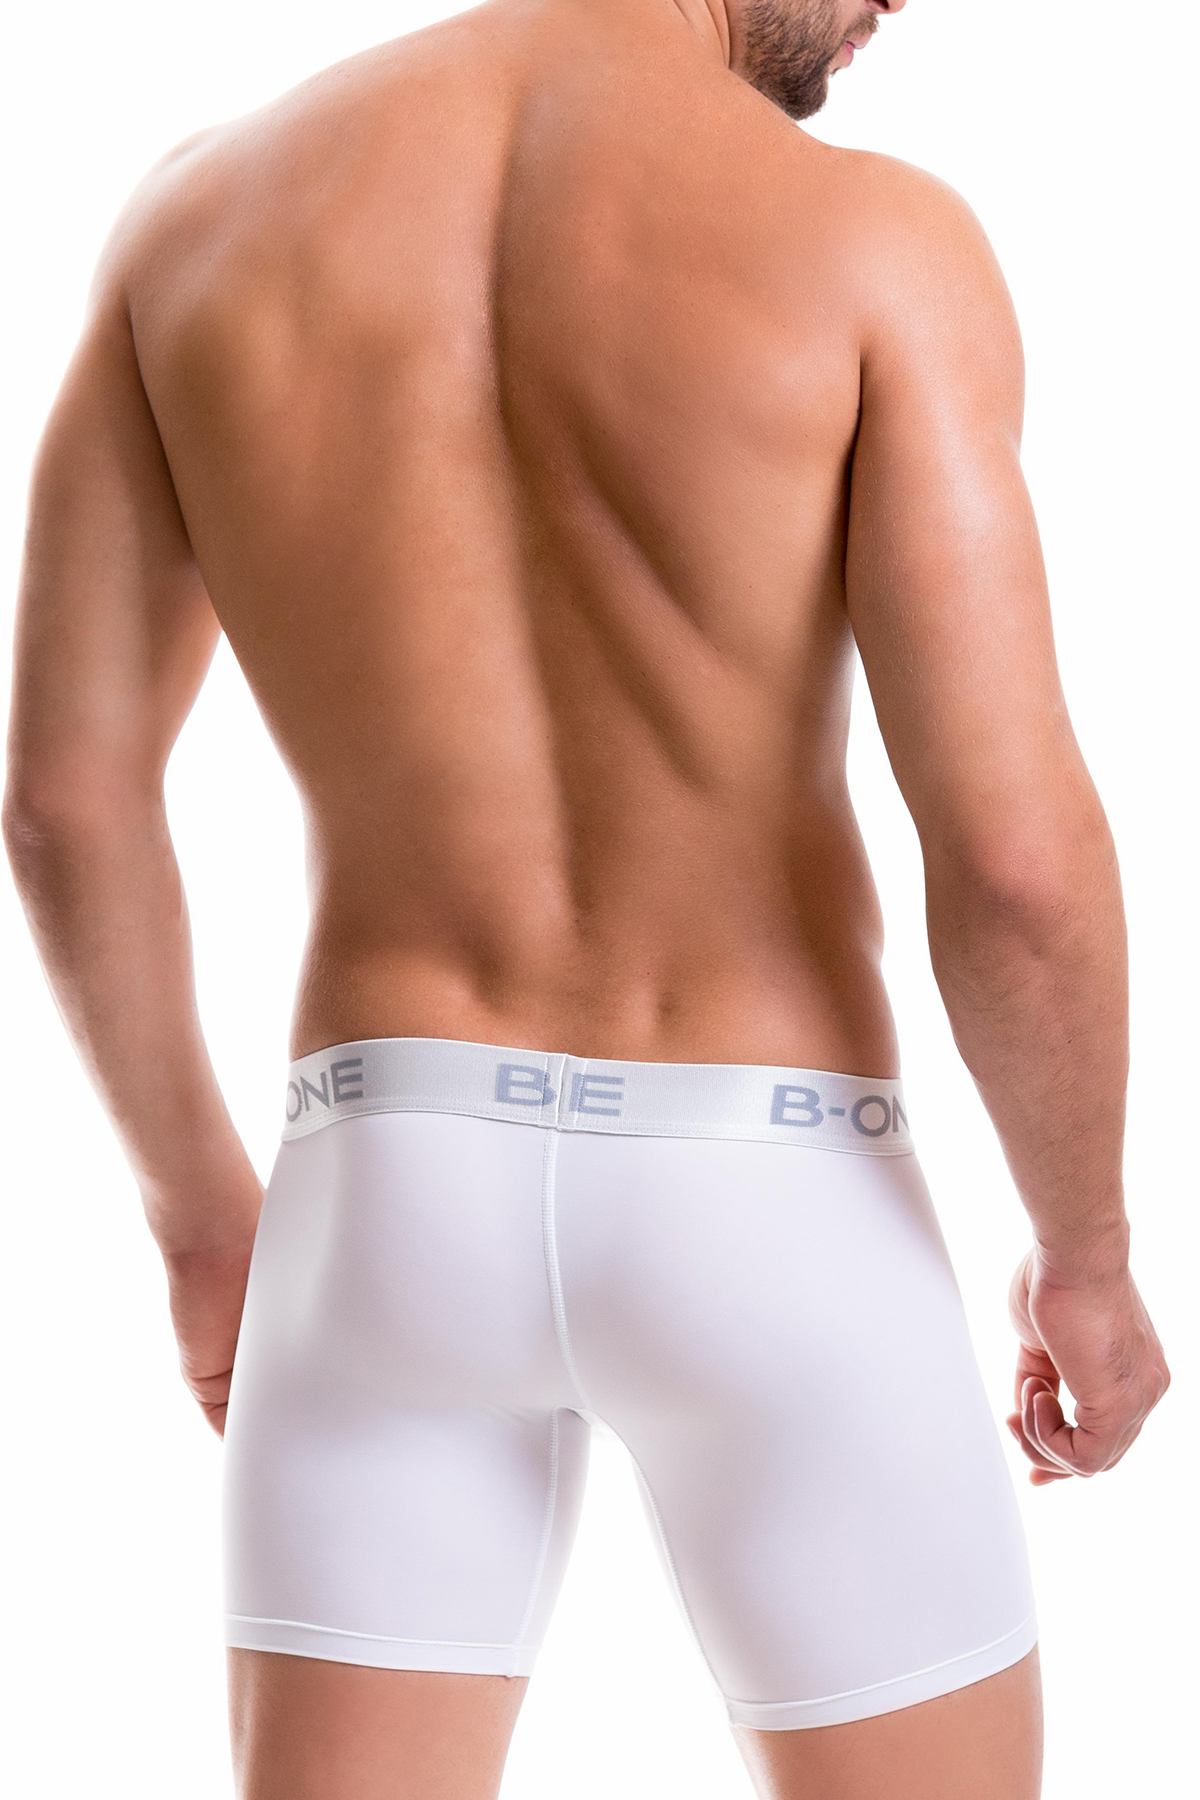 B-One by JOR White Classic Boxer Brief